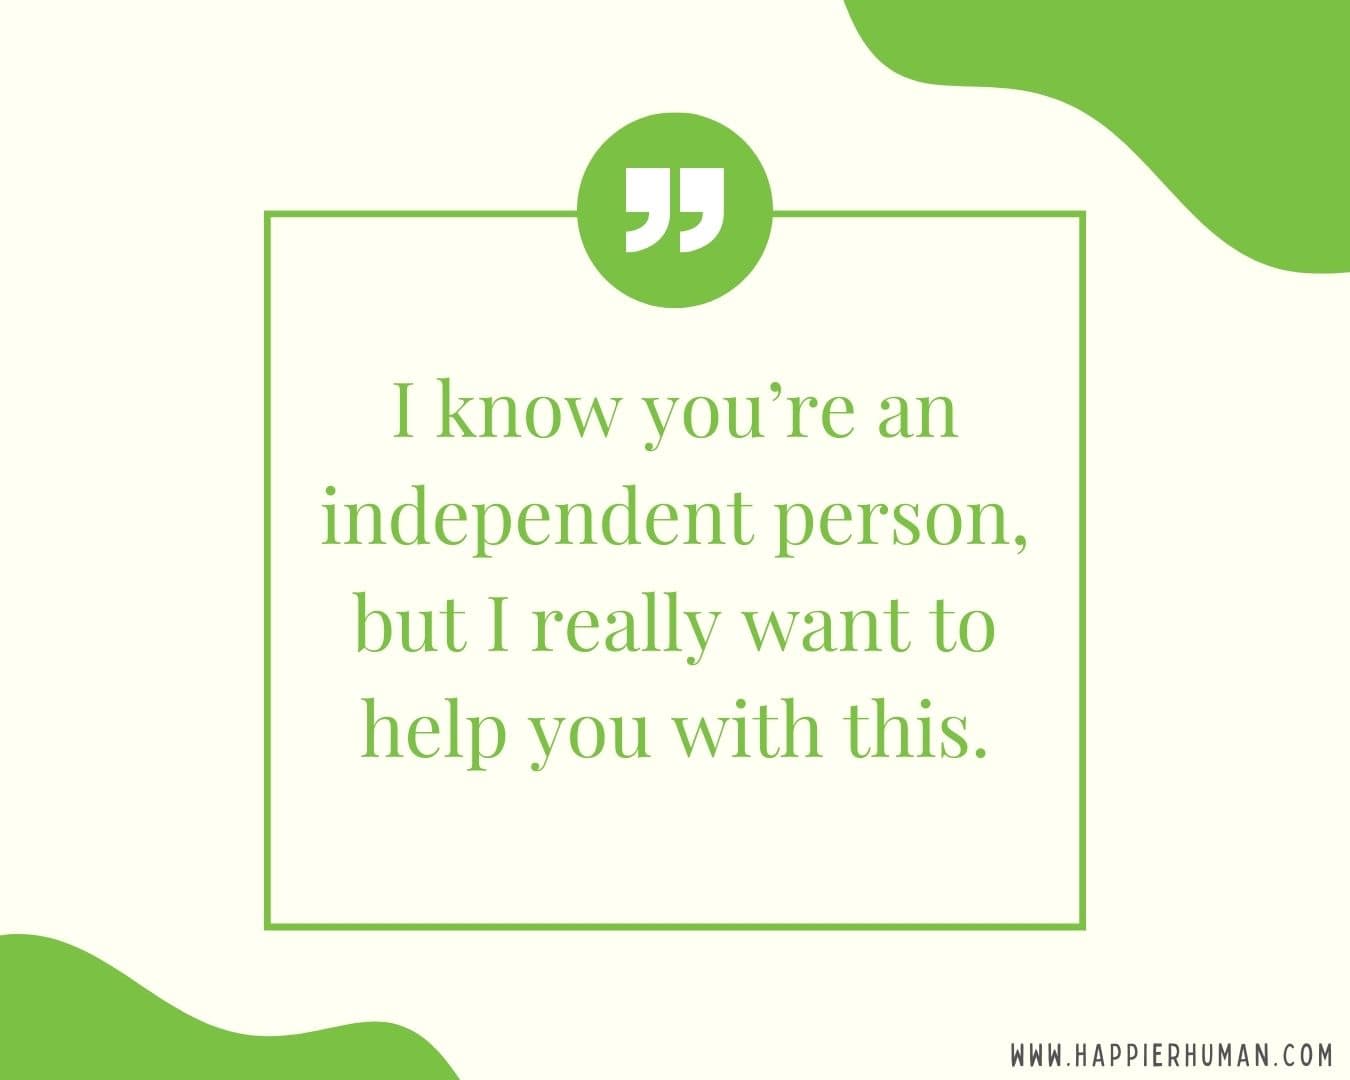 I’m Here for You Quotes - “I know you’re an independent person, but I really want to help you with this.”